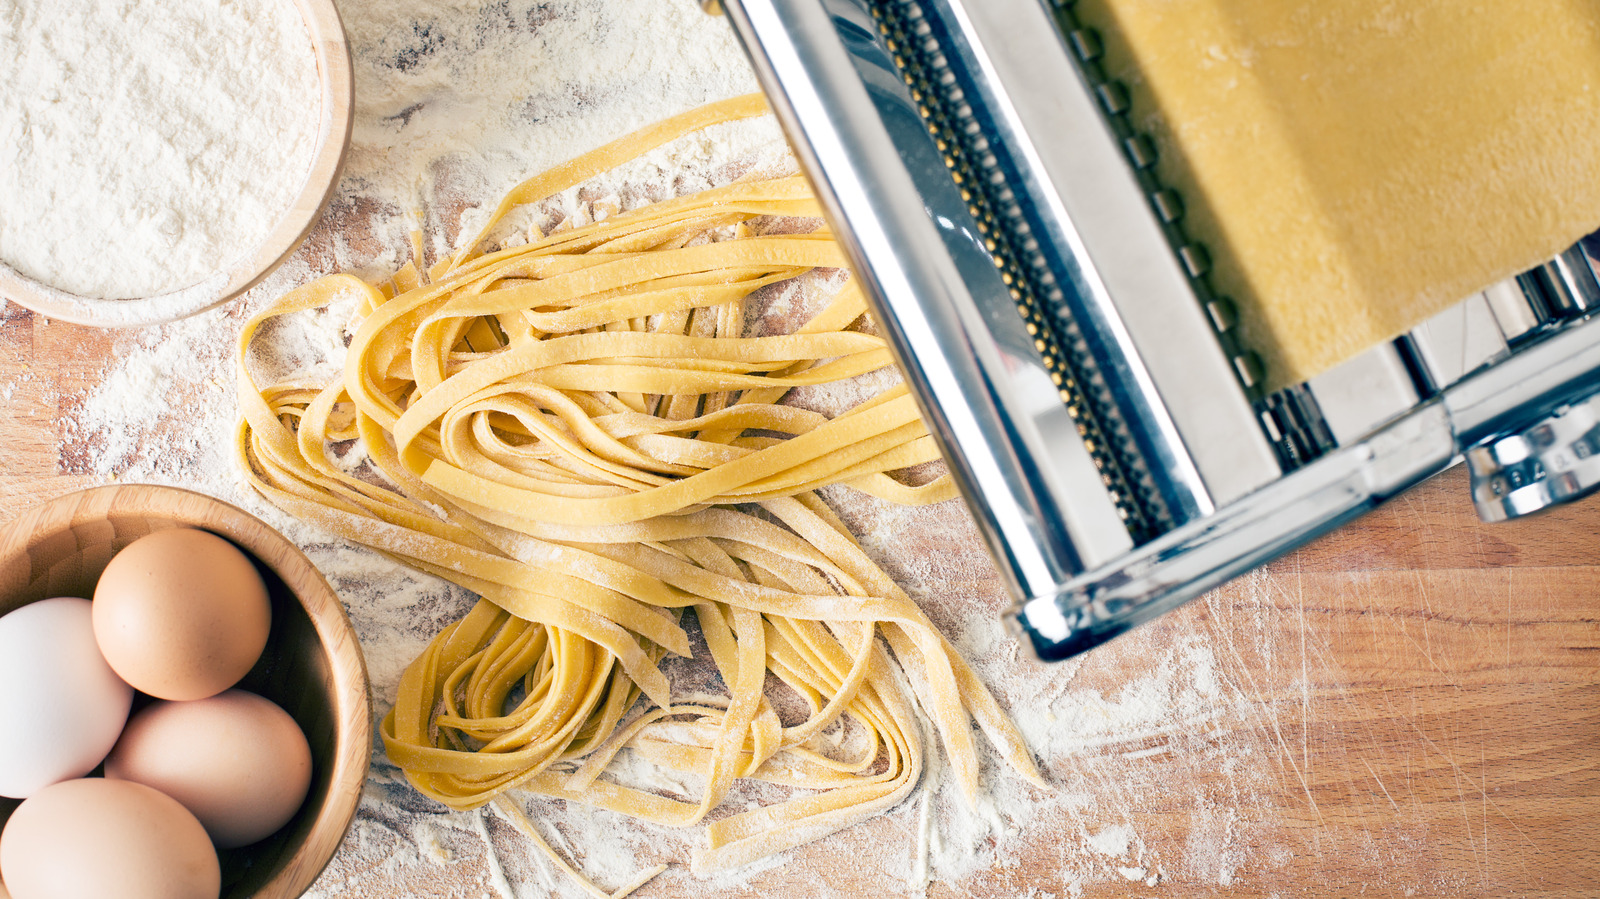 https://www.tastingtable.com/img/gallery/the-mixing-mistake-you-can-easily-fix-when-making-pasta-from-scratch/l-intro-1689101030.jpg